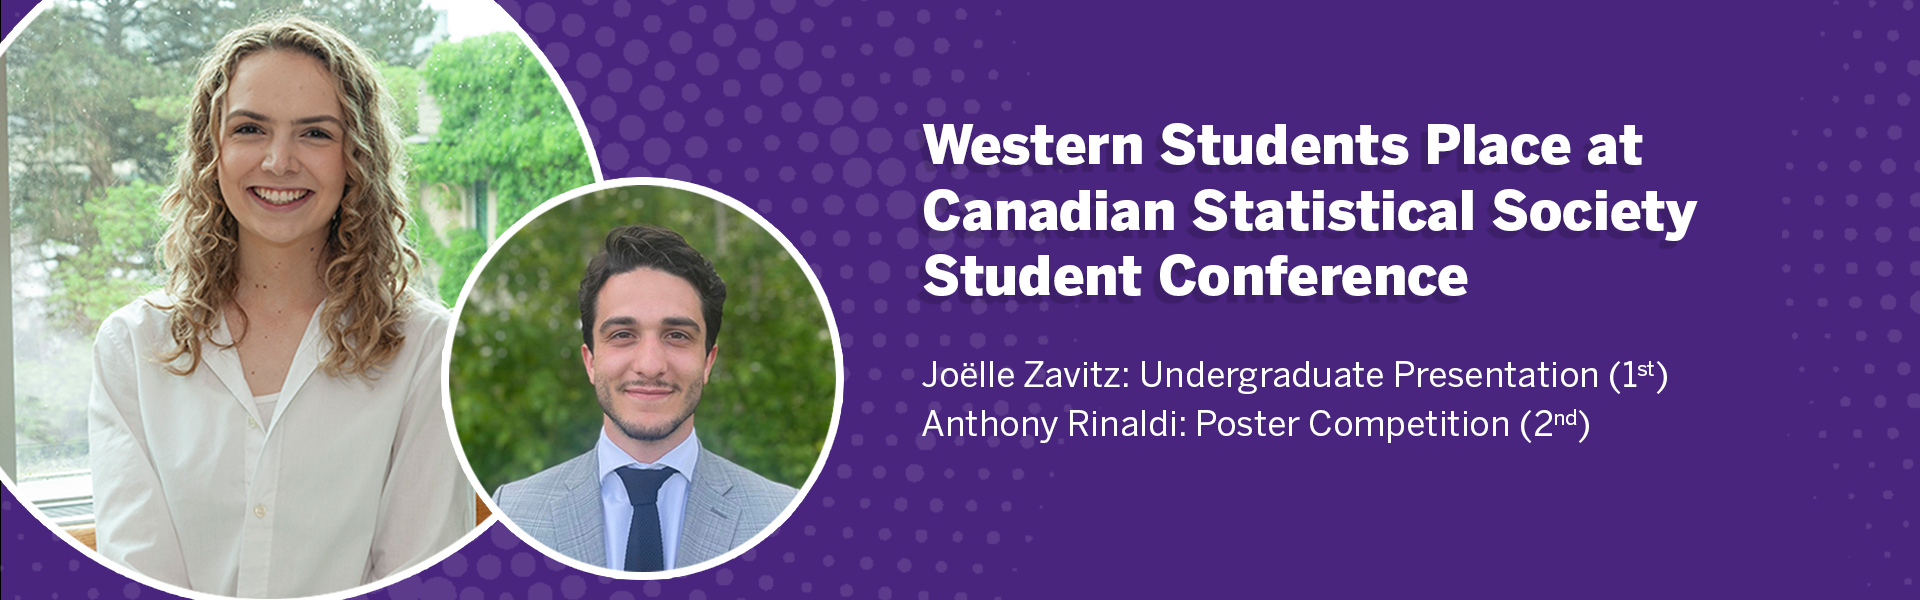 Western Students Place at Canadian Society Student Conference